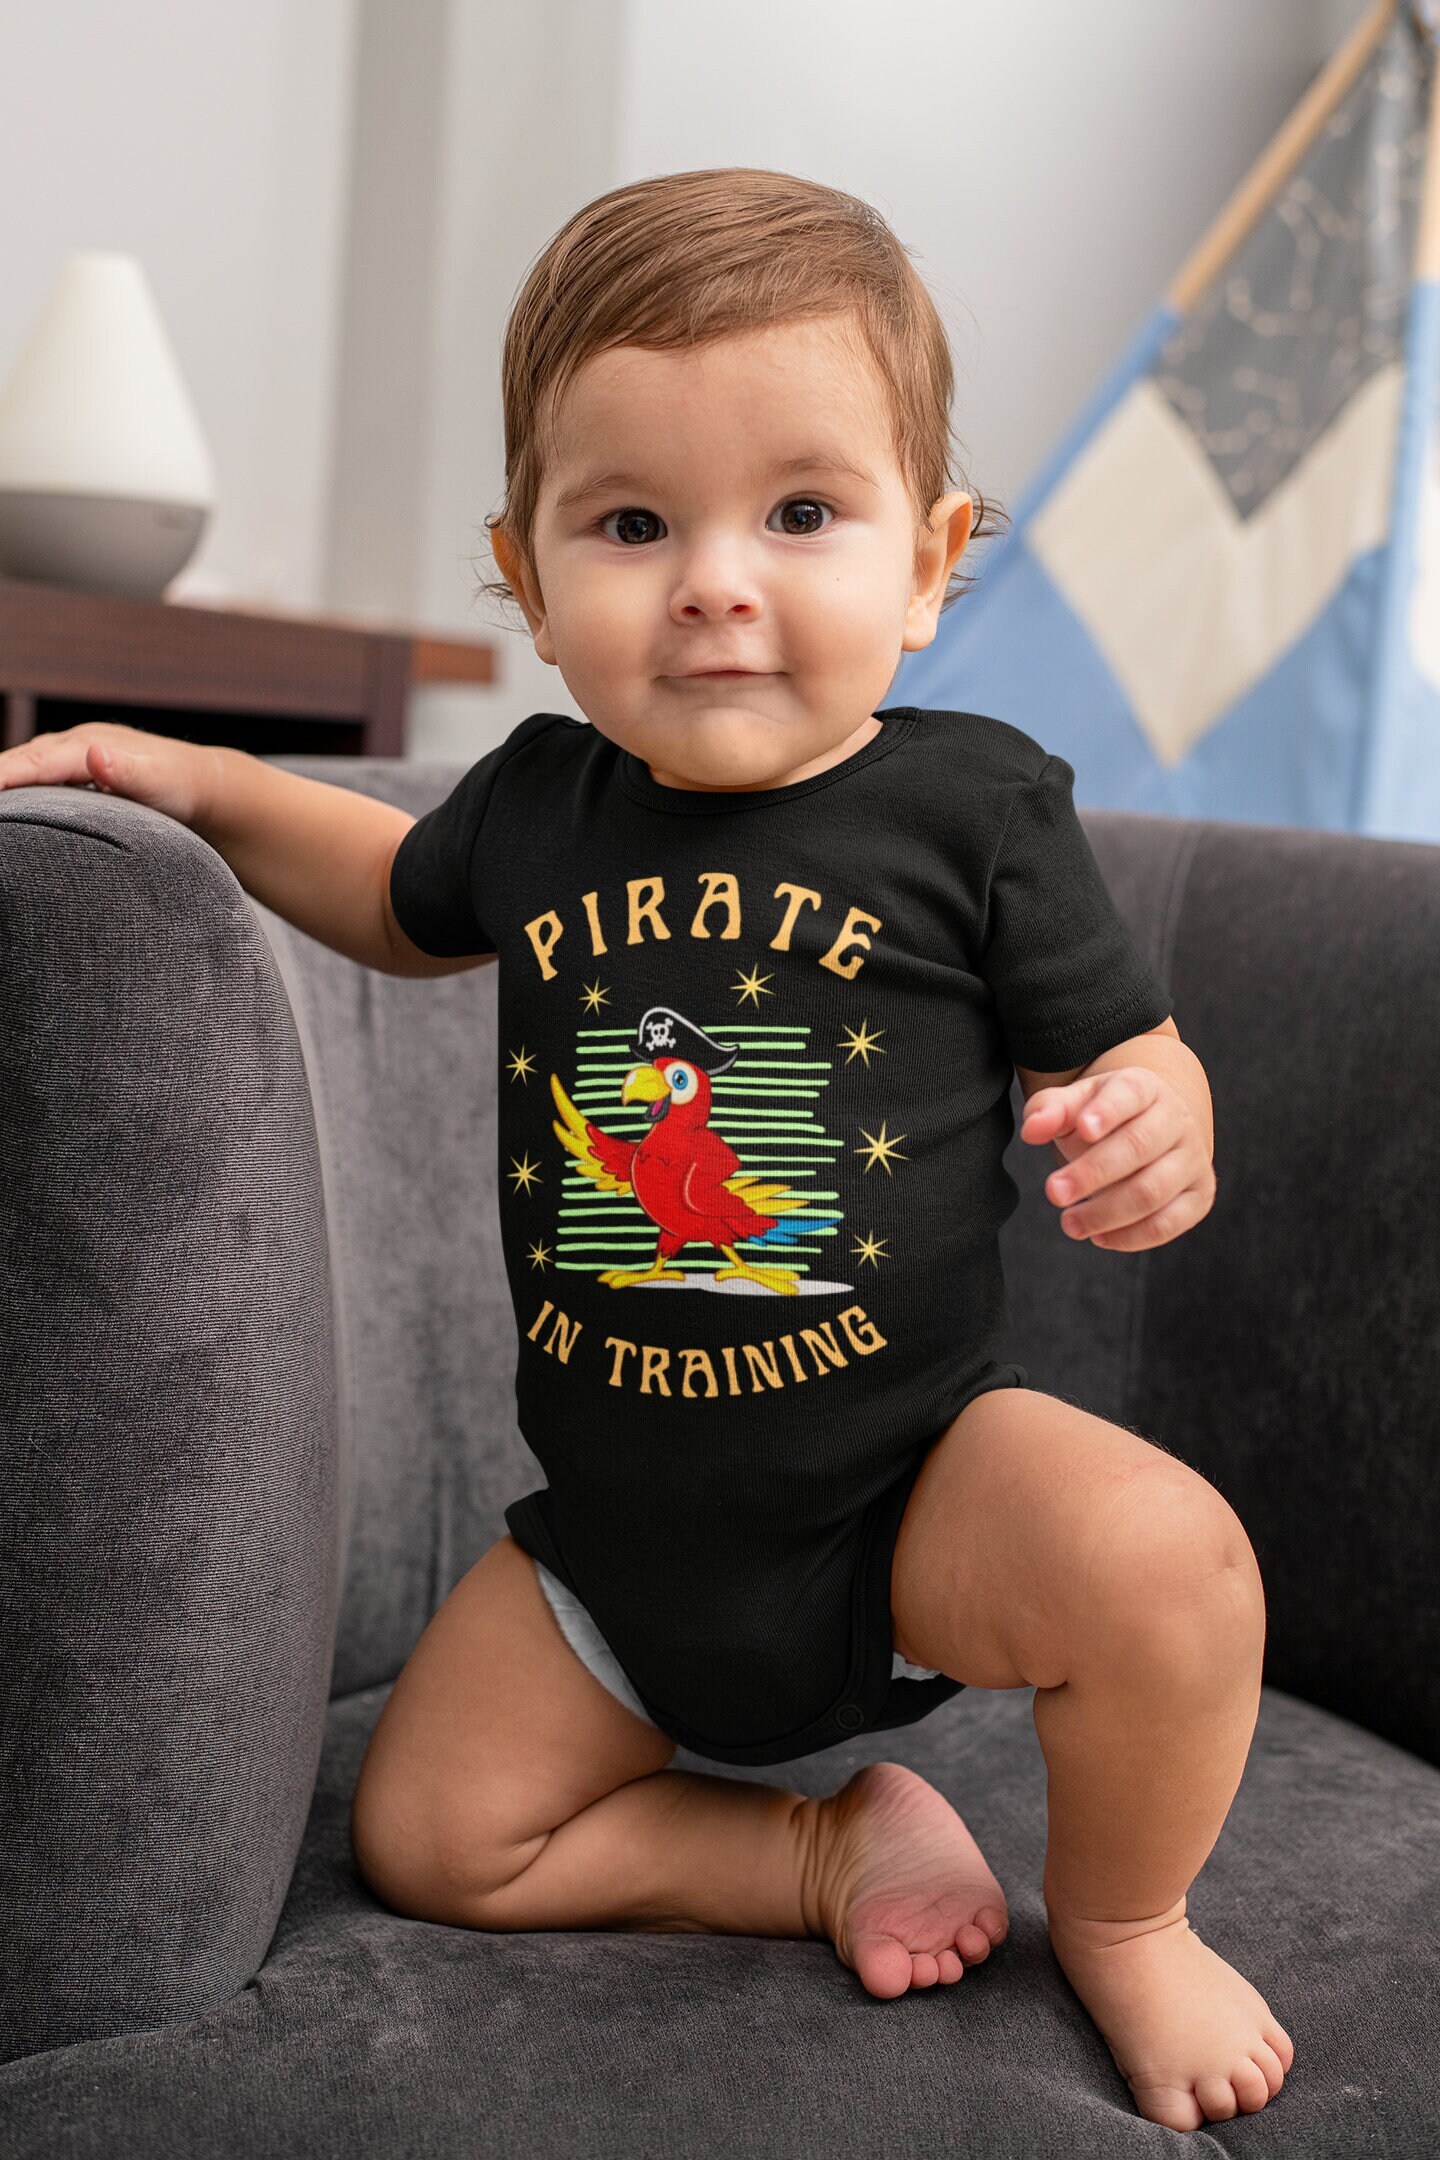 Pirate In Training T-Shirt - Pirate Fashions